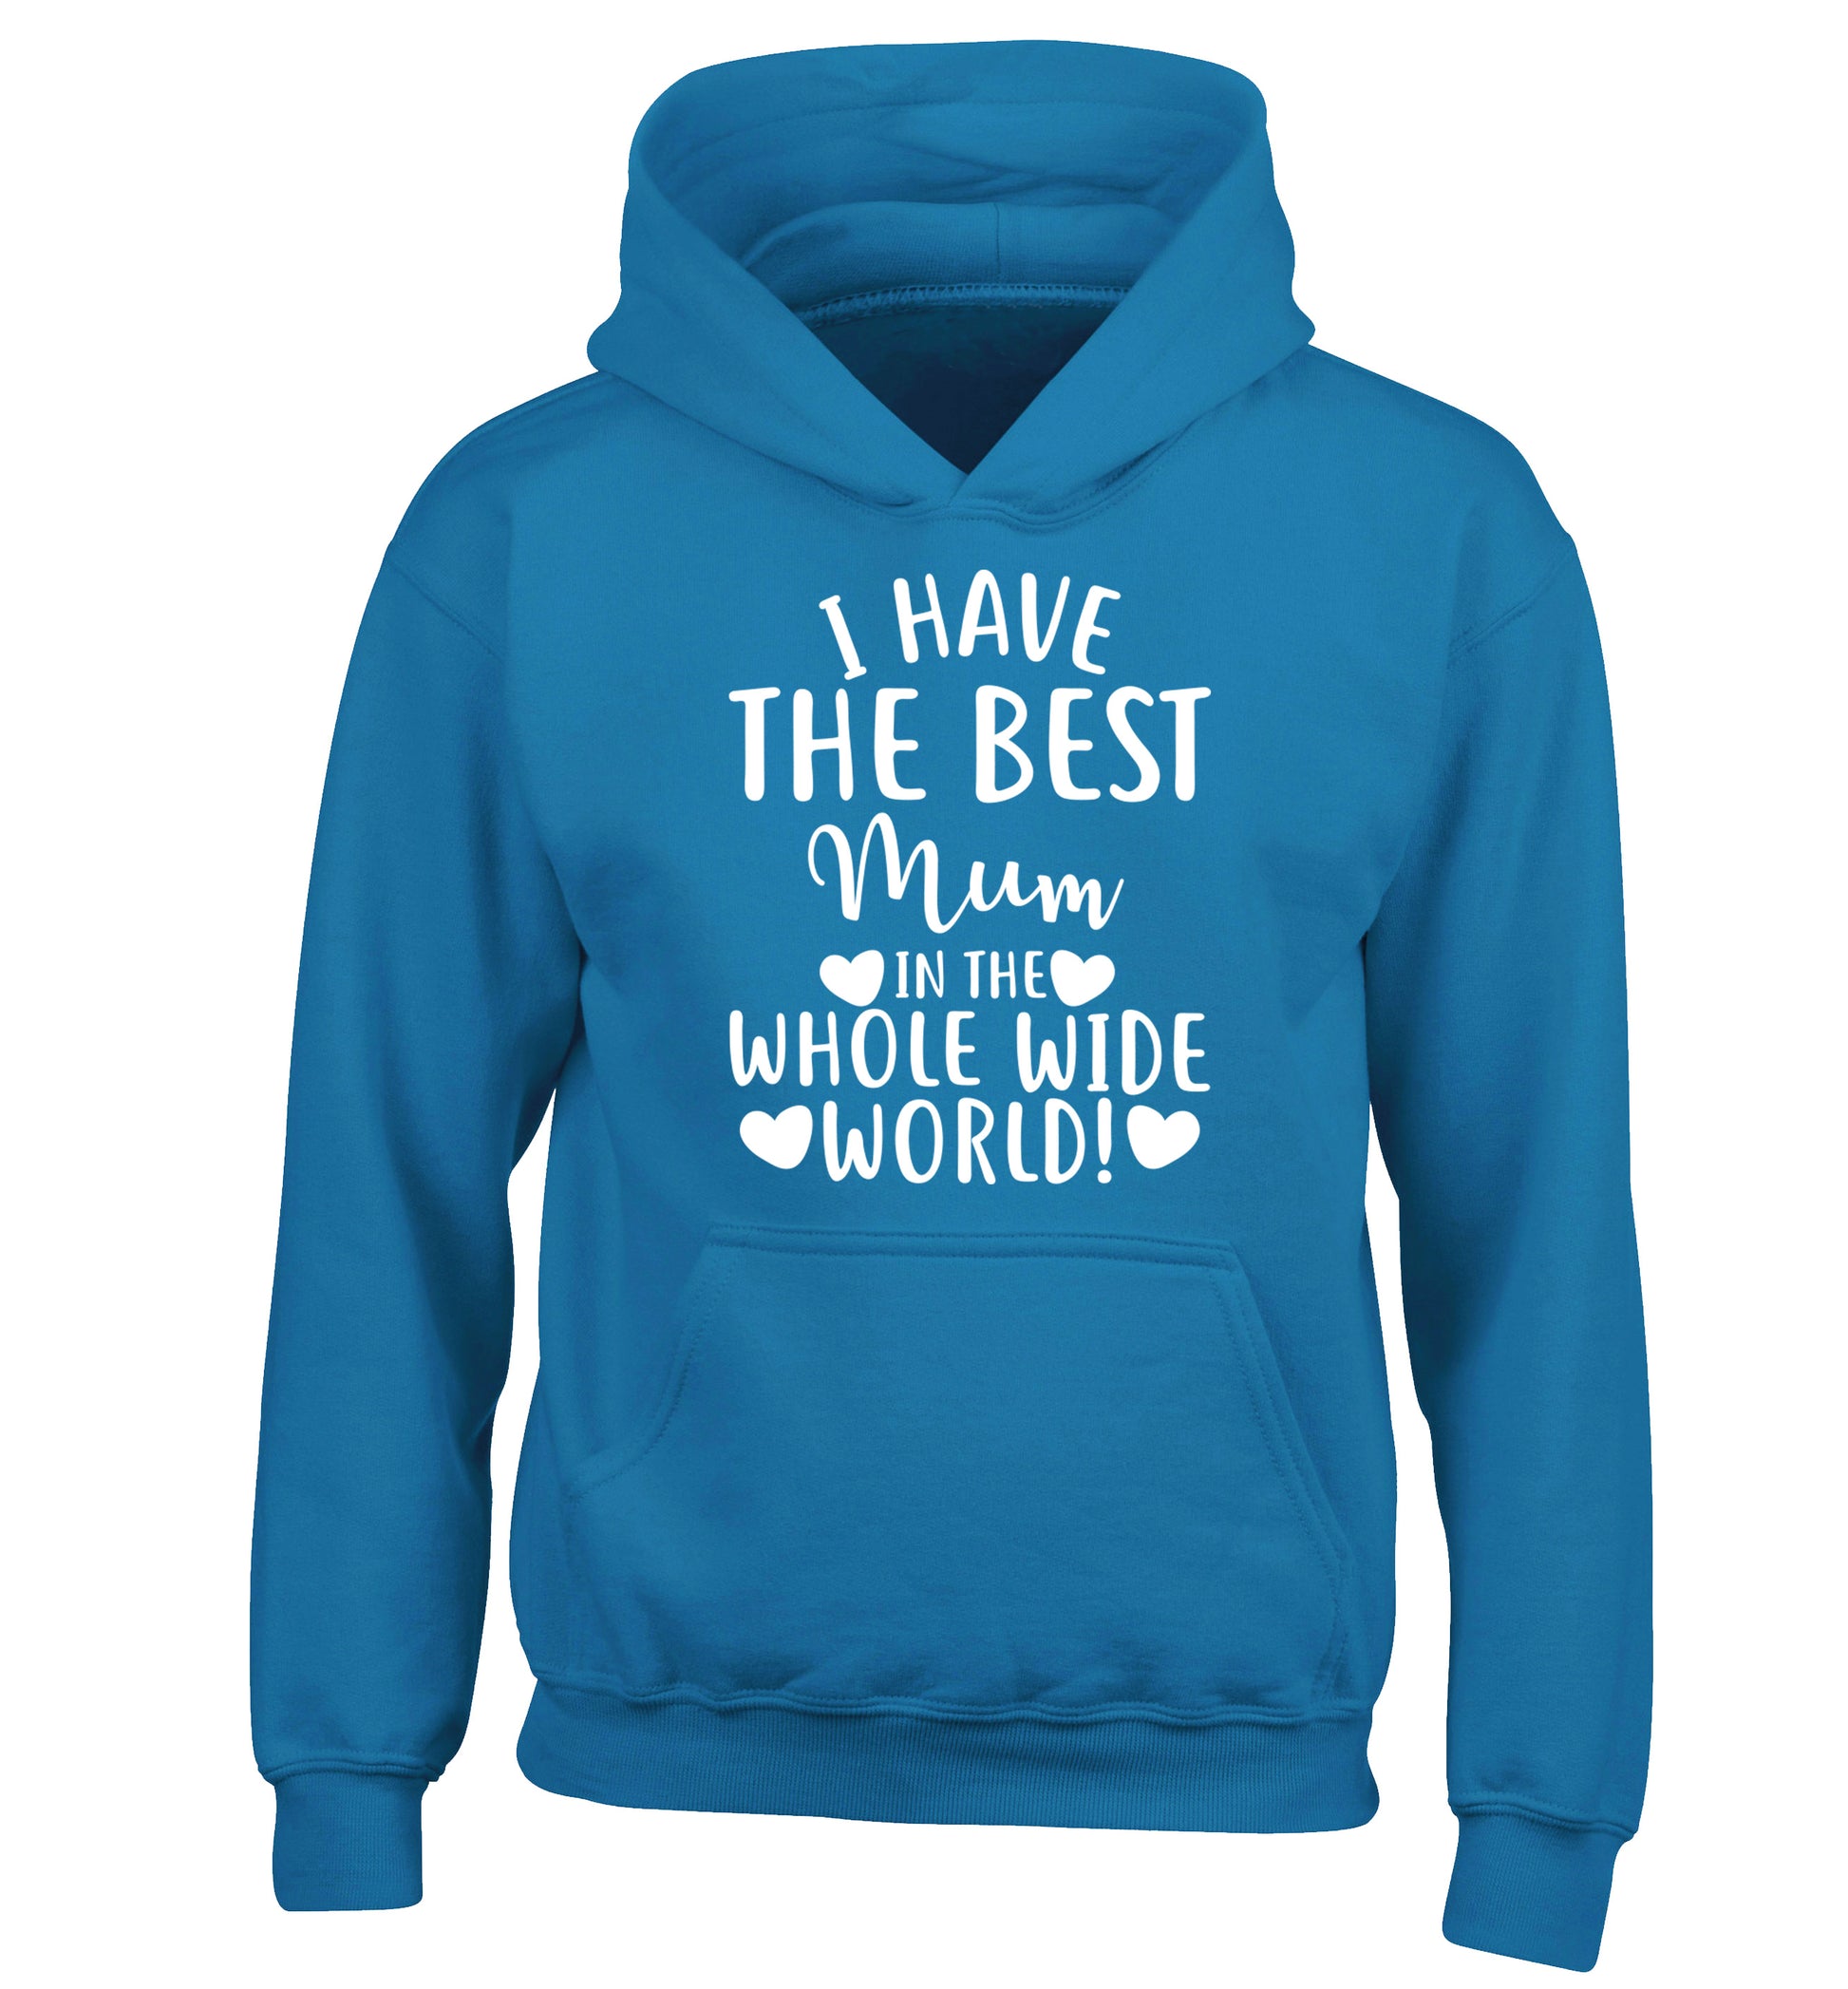 I have the best mum in the whole wide world! children's blue hoodie 12-13 Years